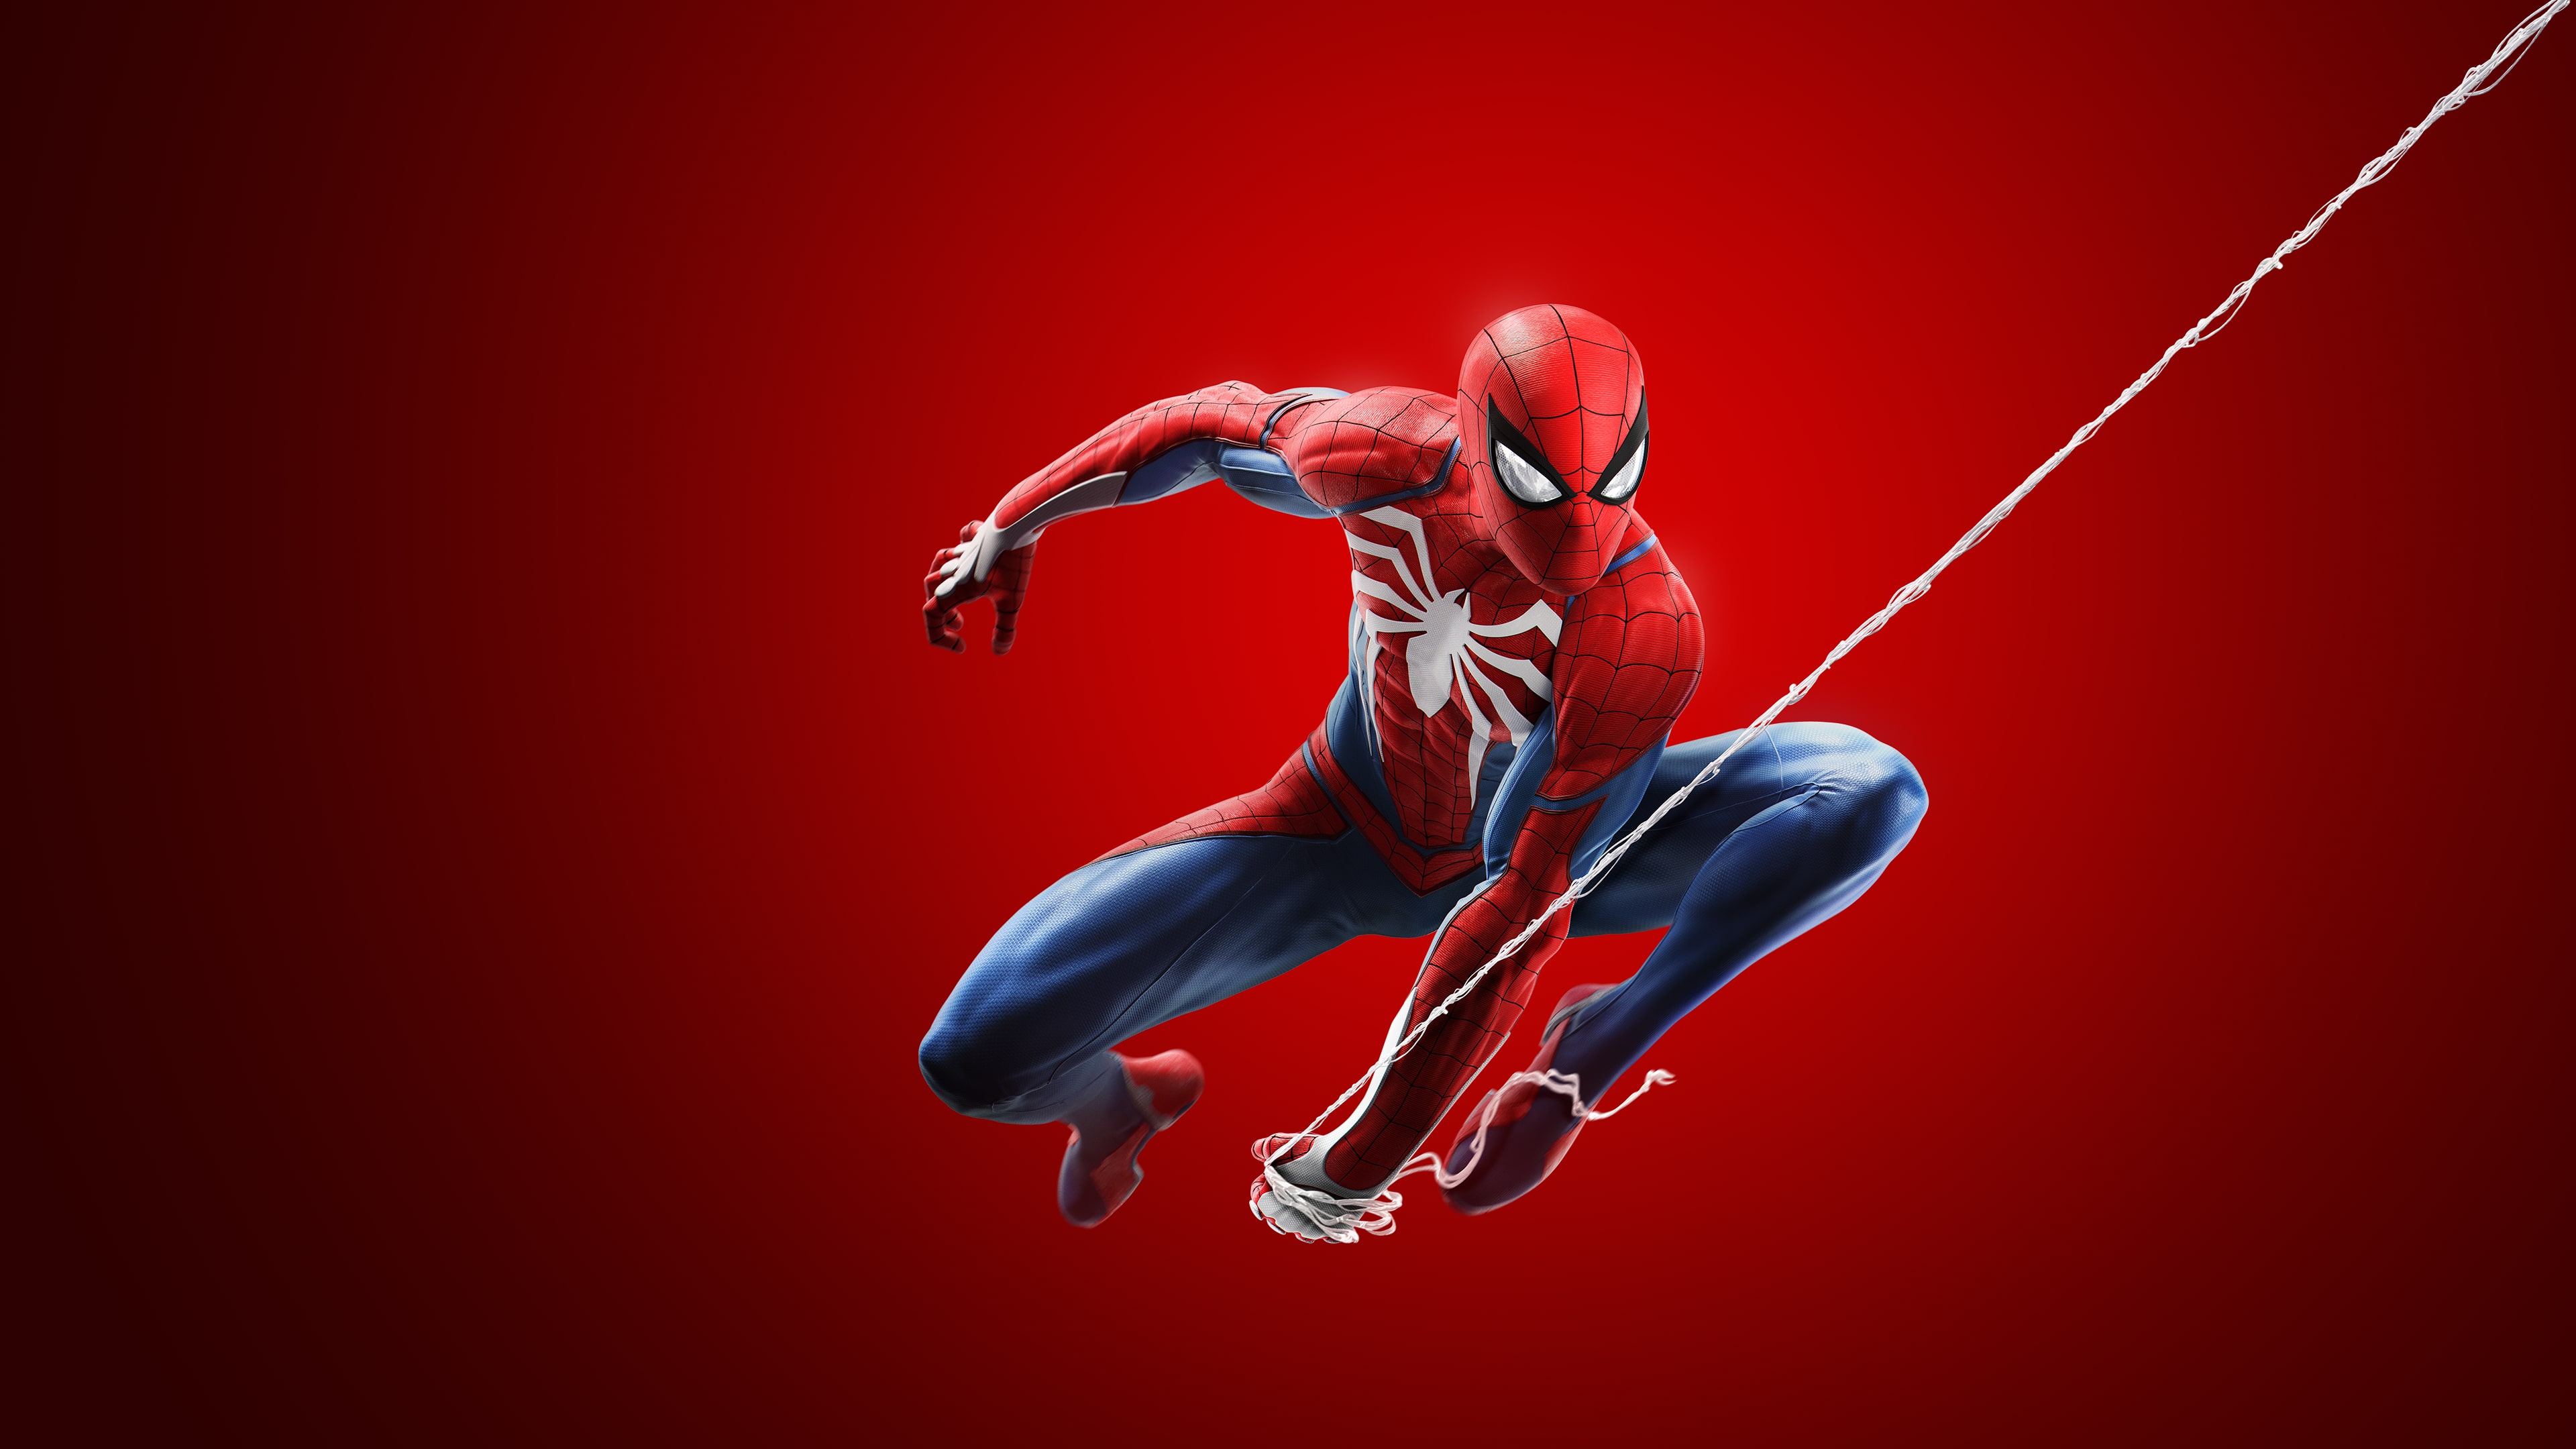 Marvel’s Spider-Man : Édition Game of the Year